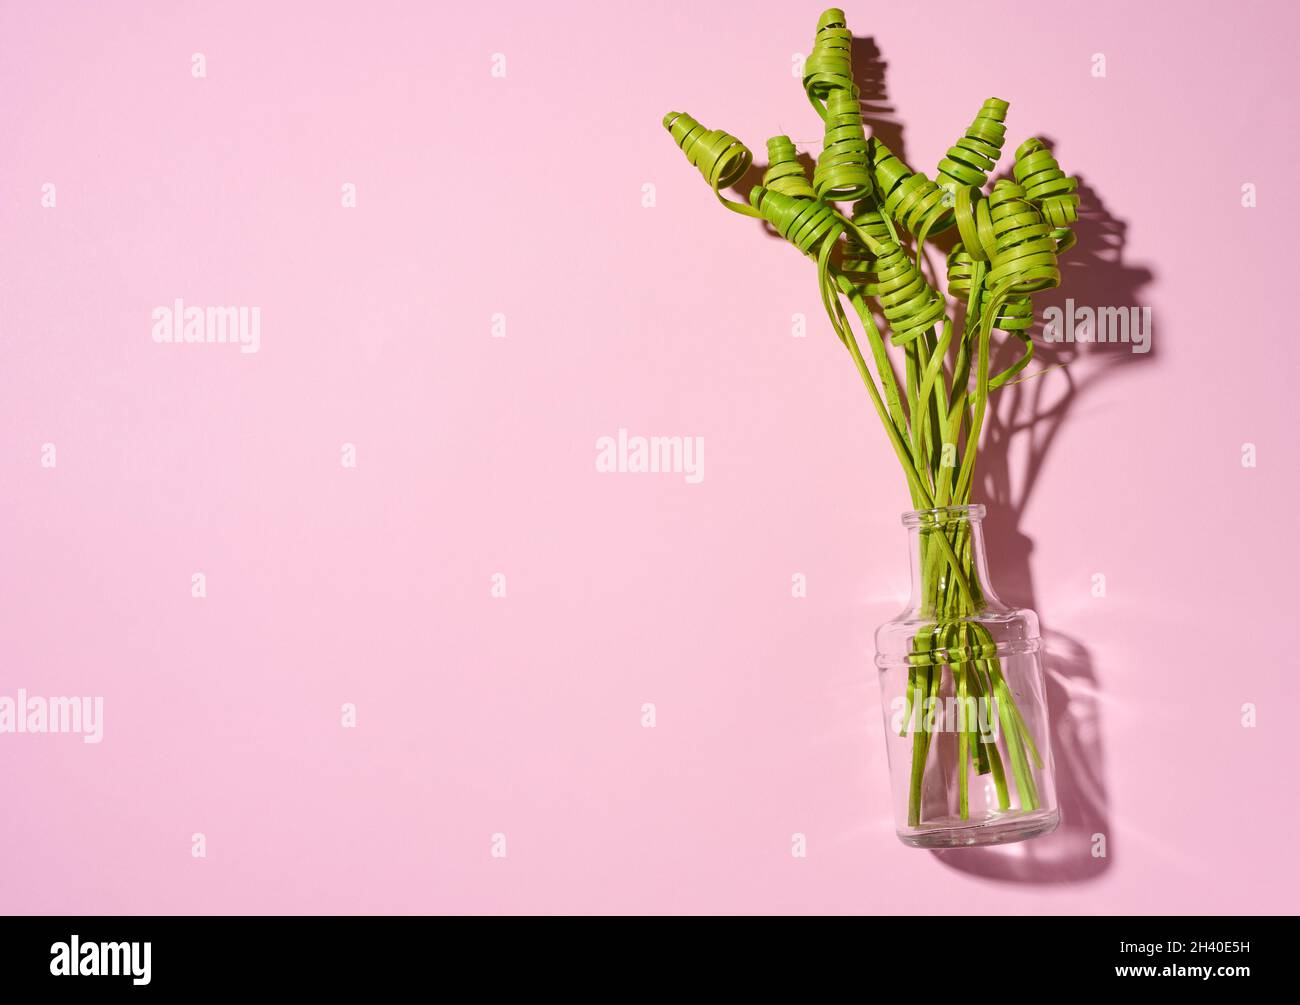 Glass transparent vase with green dried flowers on a white table, pink background Stock Photo